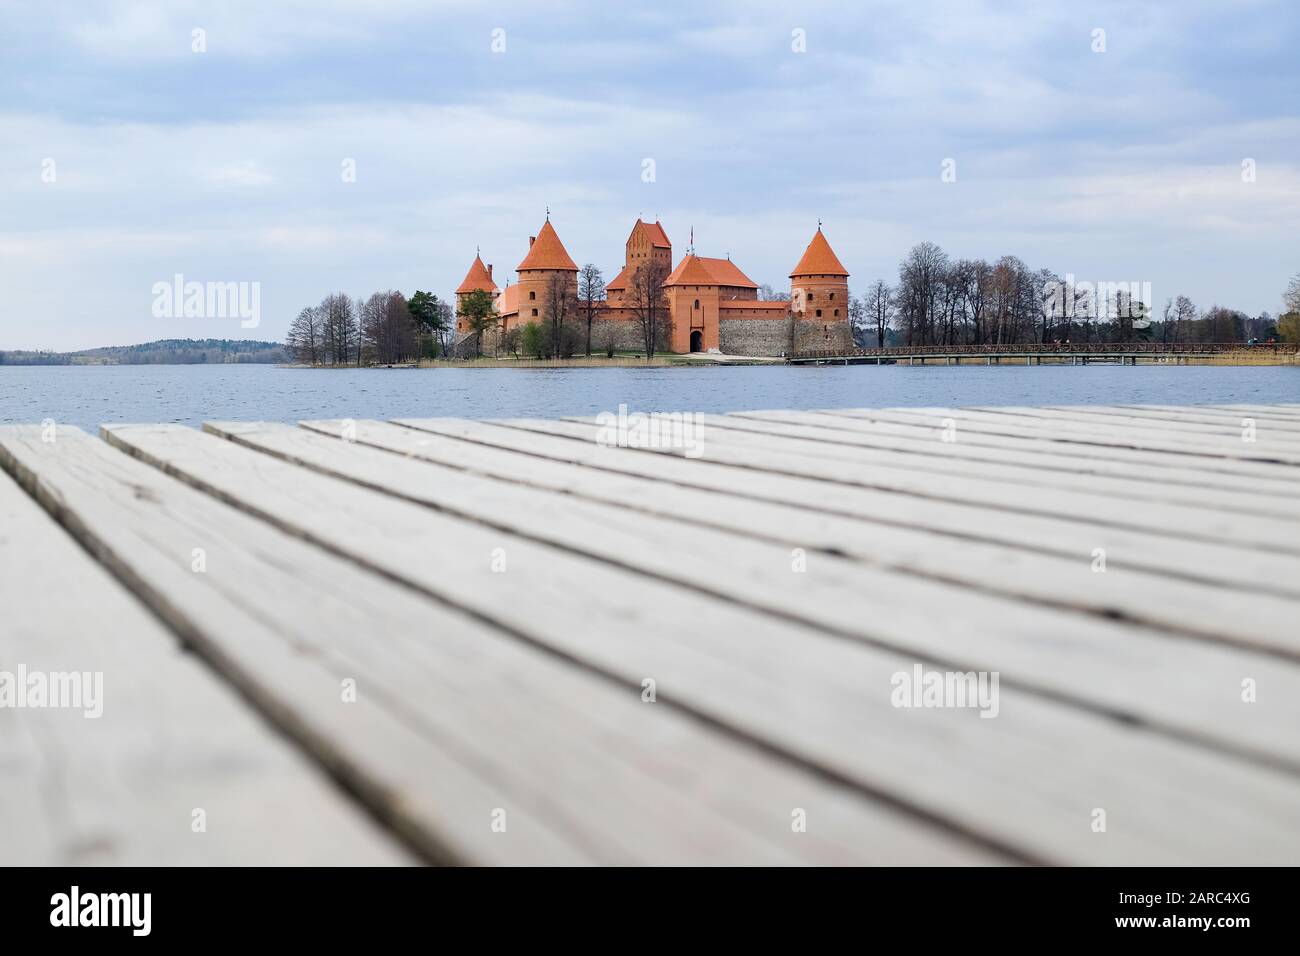 Trakai Island Castle in Lithuania with blurred boardwalk in foreground Stock Photo